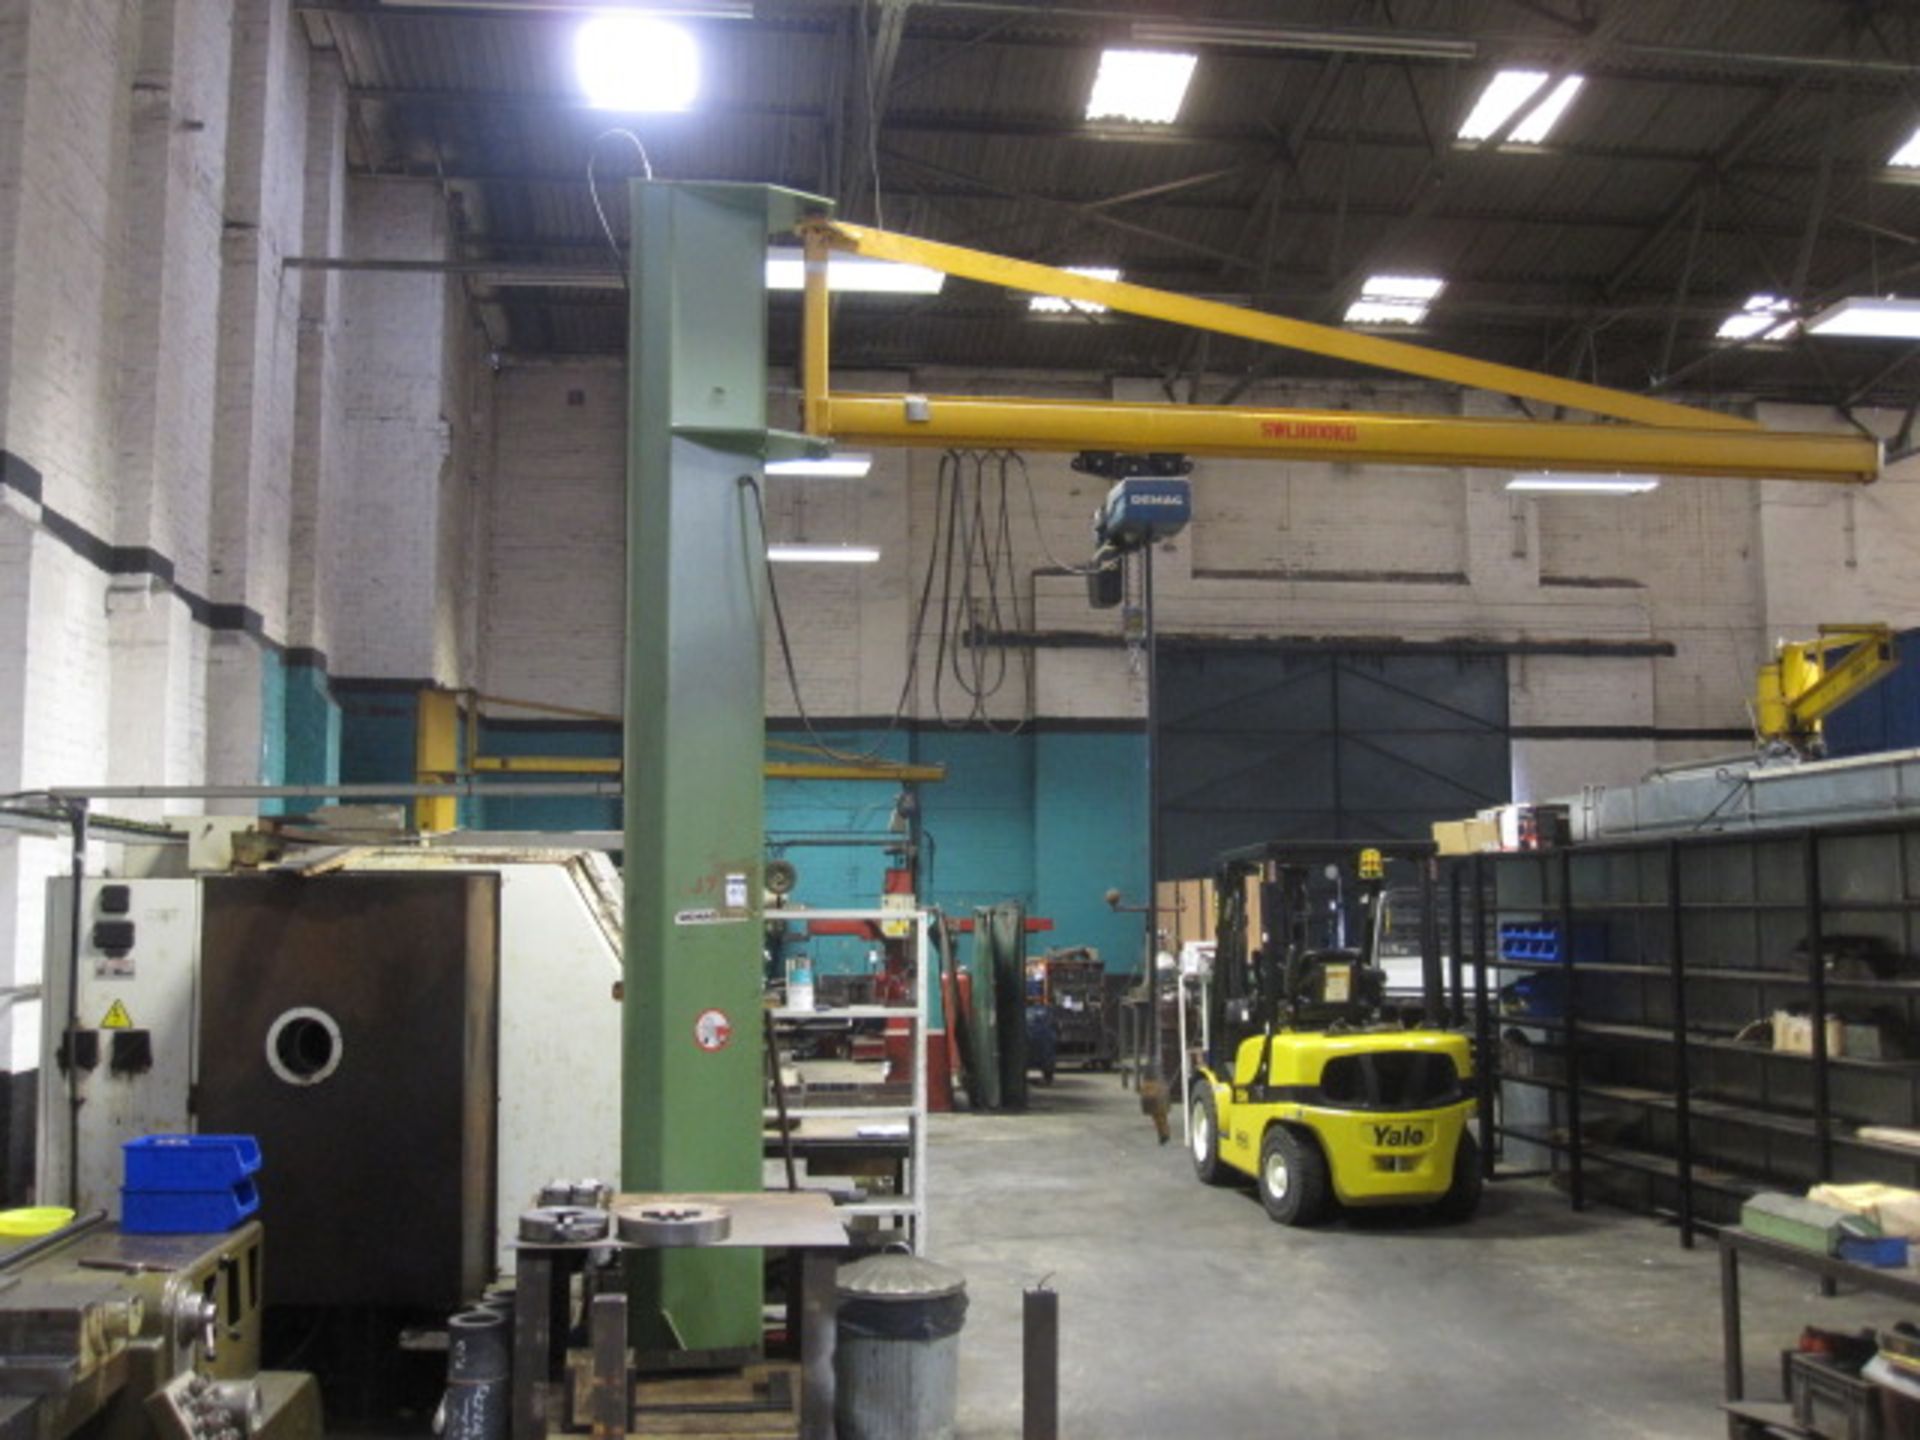 DEMAG 1000kg SWL swing jib crane with DEMAG pendant controlled electric chain block. Note: Full Risk